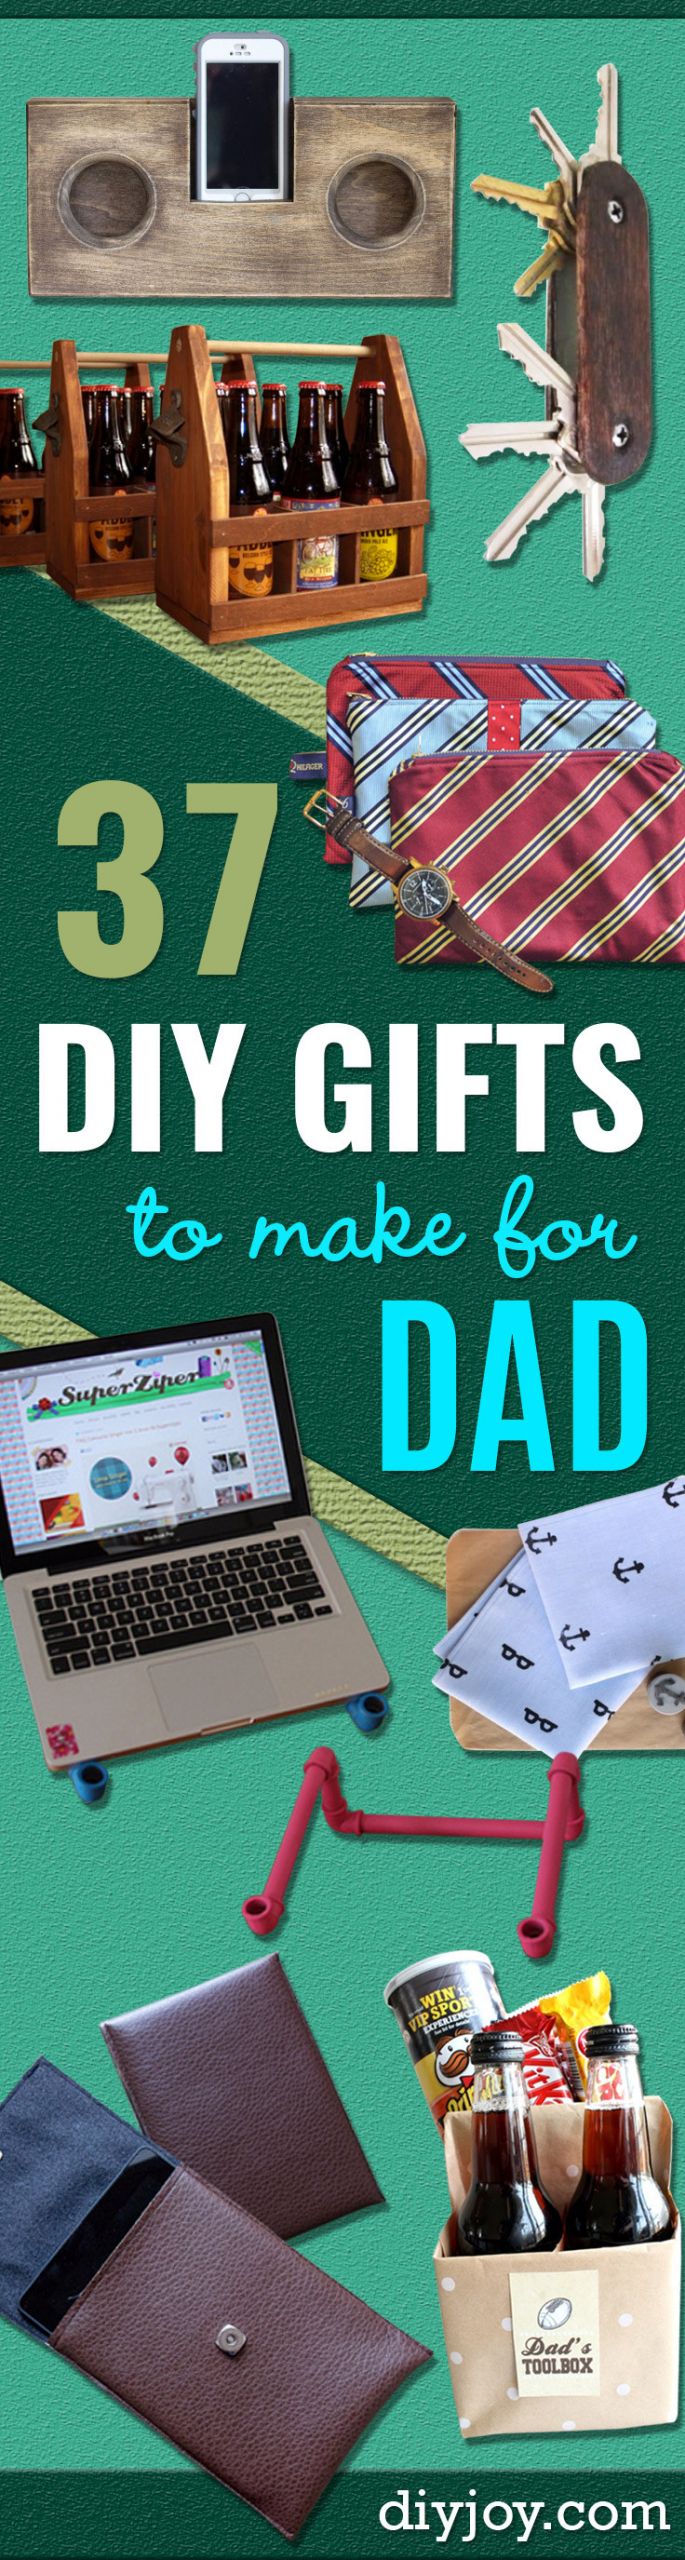 Christmas Gifts For Dad DIY
 37 Awesome DIY Gifts to Make for Dad